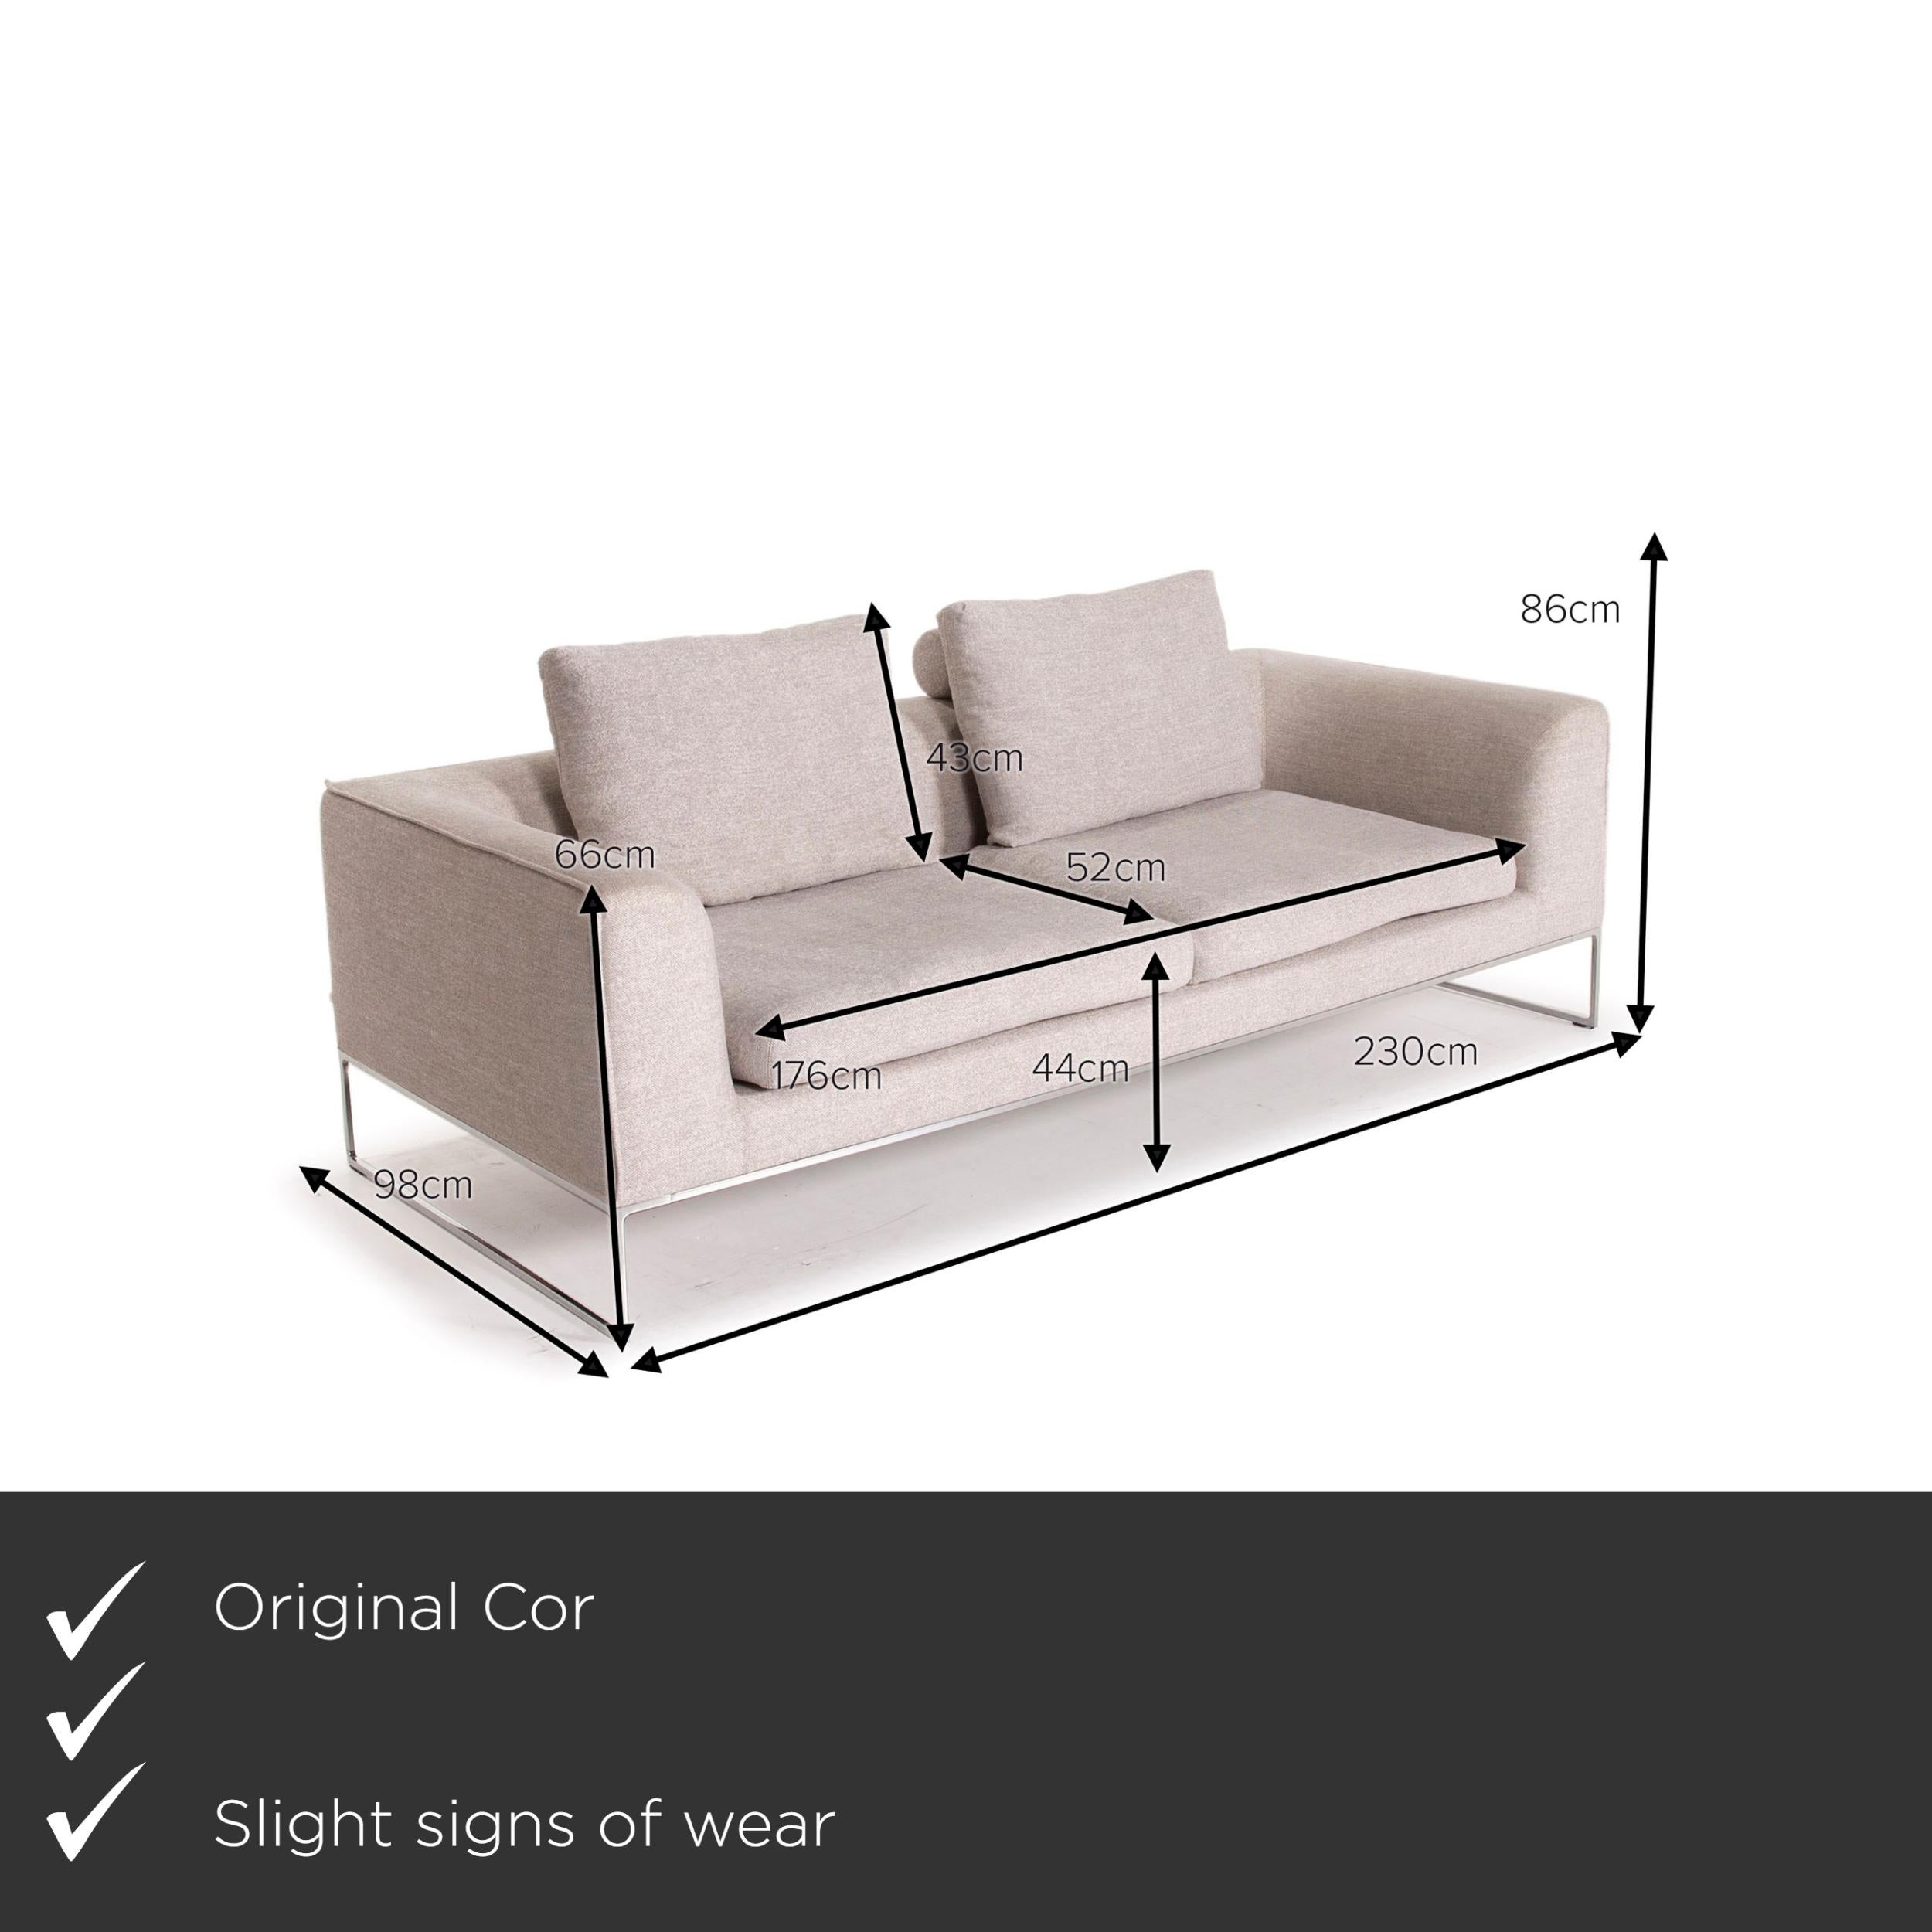 We present to you a COR Mell fabric sofa gray two-seater.


 Product measurements in centimeters:
 

Depth: 98
Width: 230
Height: 86
Seat height: 44
Rest height: 66
Seat depth: 52
Seat width: 176
Back height: 43.
 